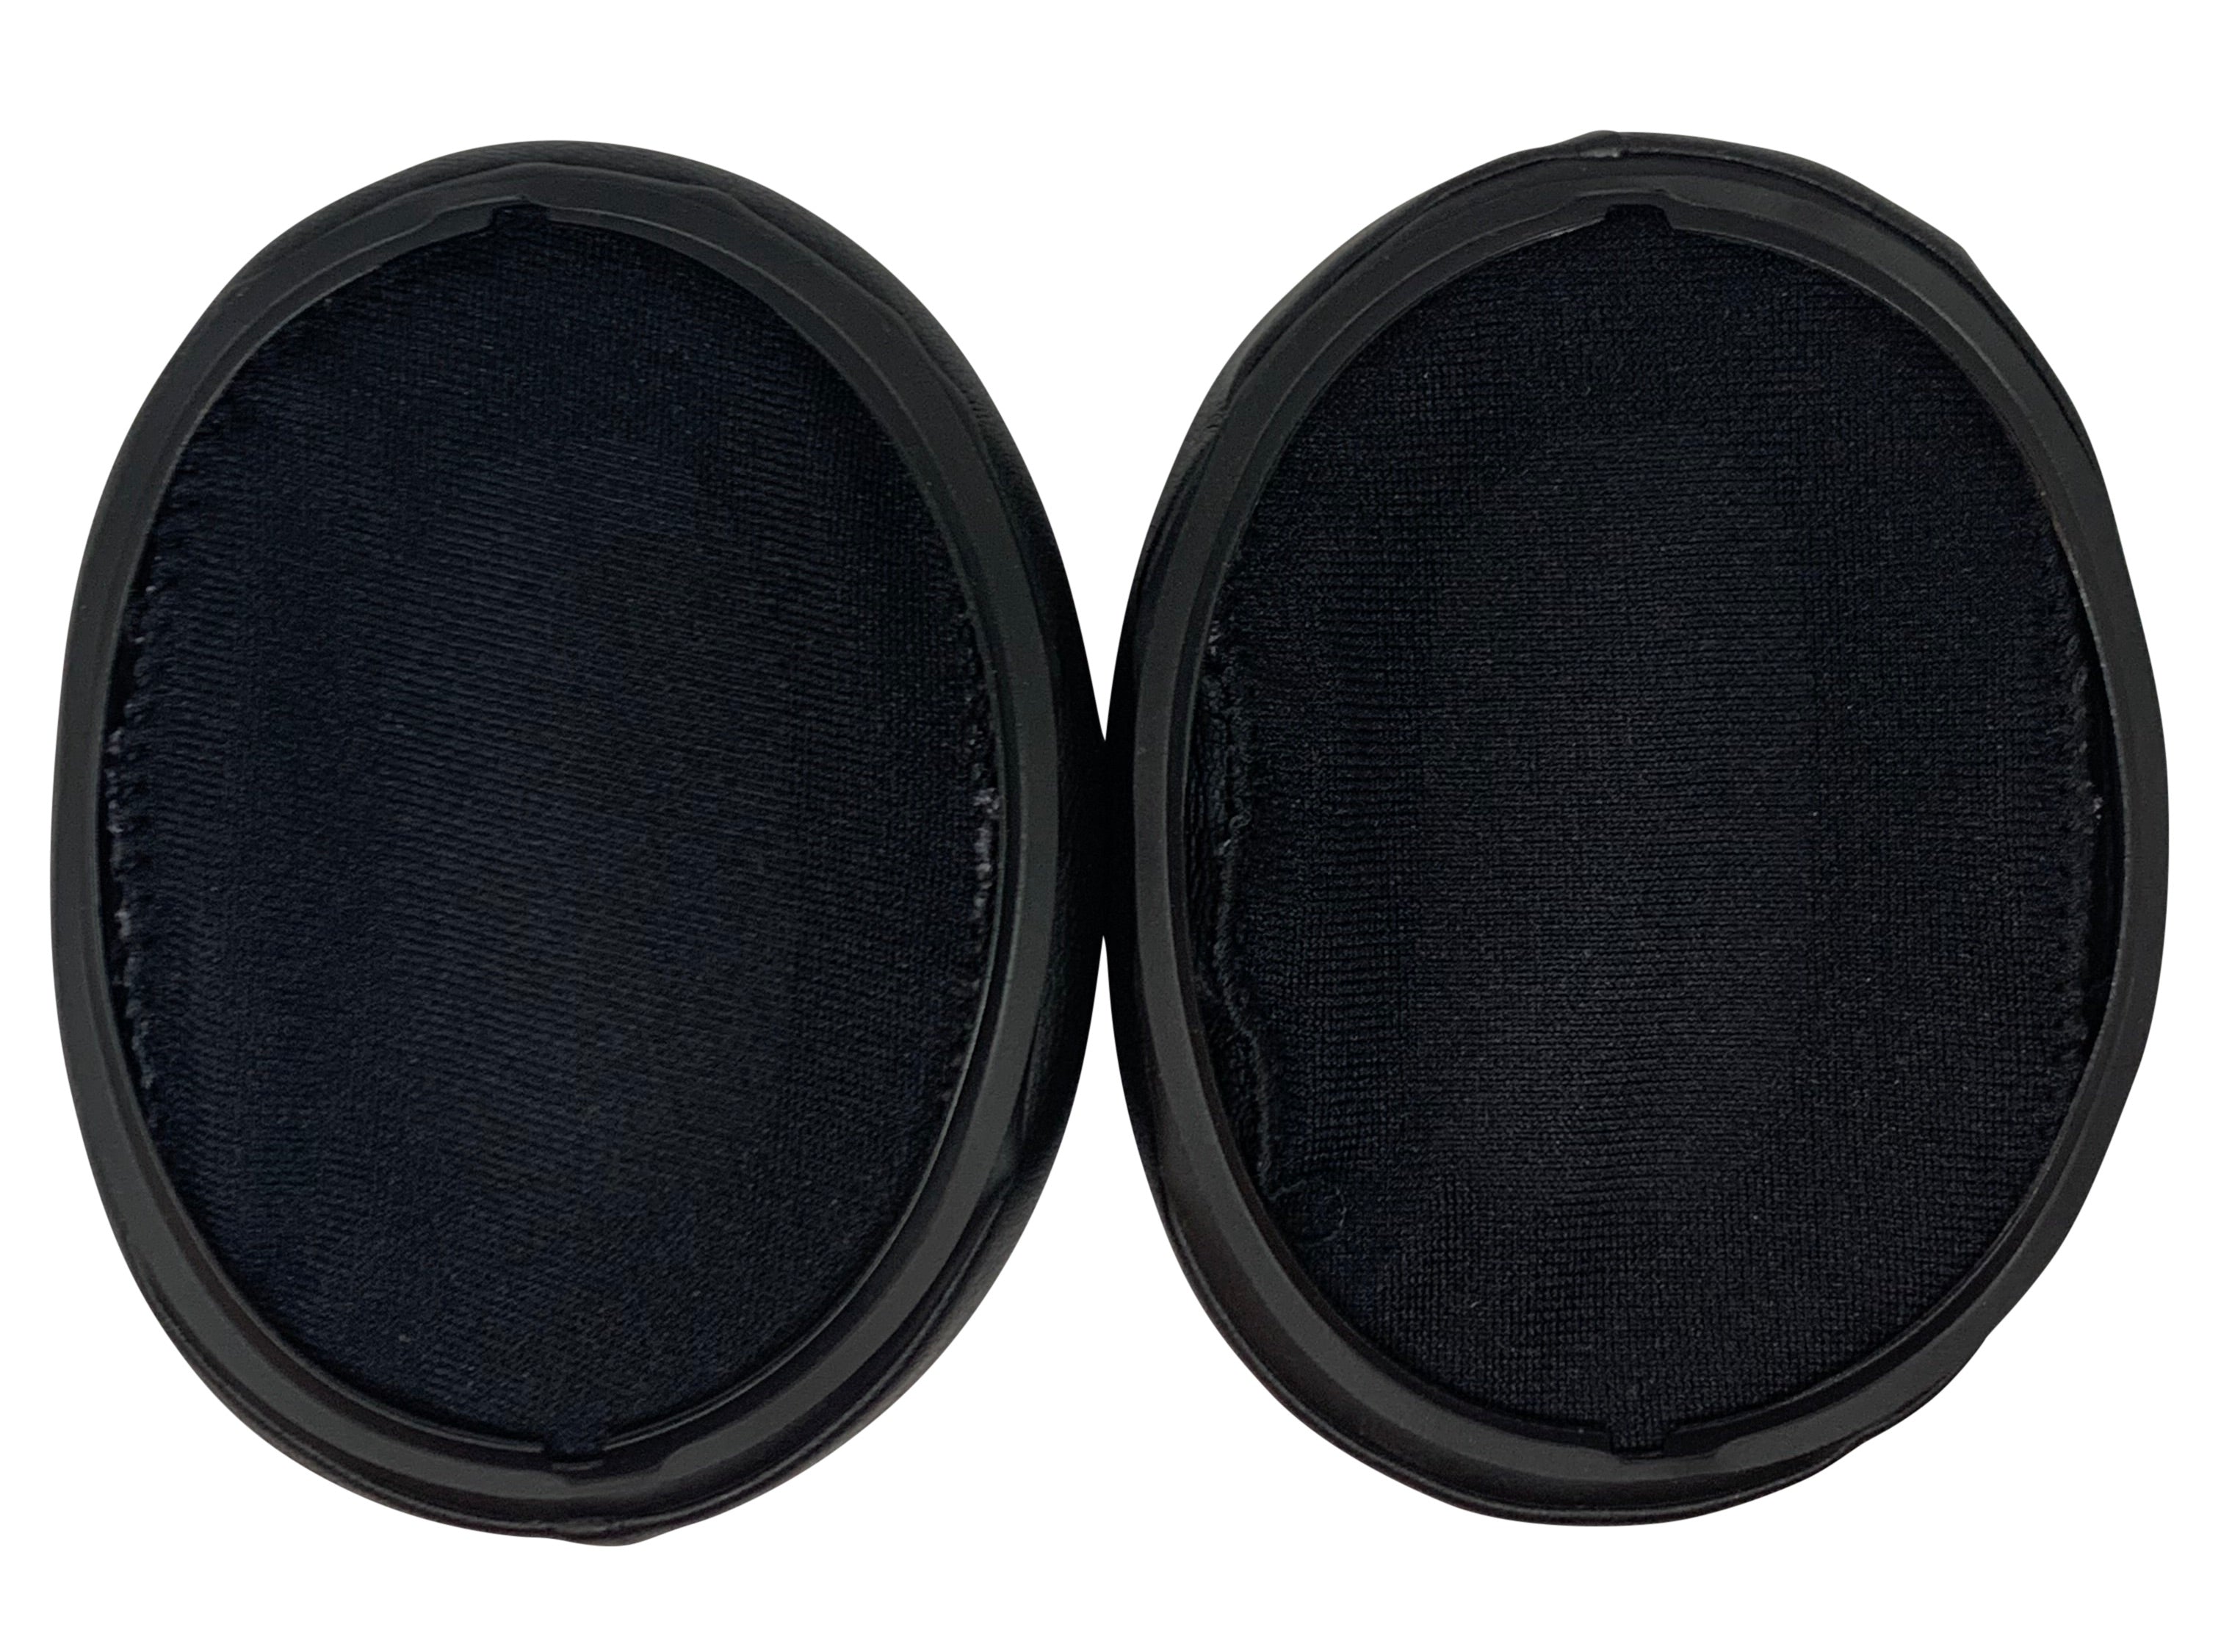 CentralSound Replacement Ear Pad Cushions for Sony WH-XB900N XB900 Headphones - CentralSound